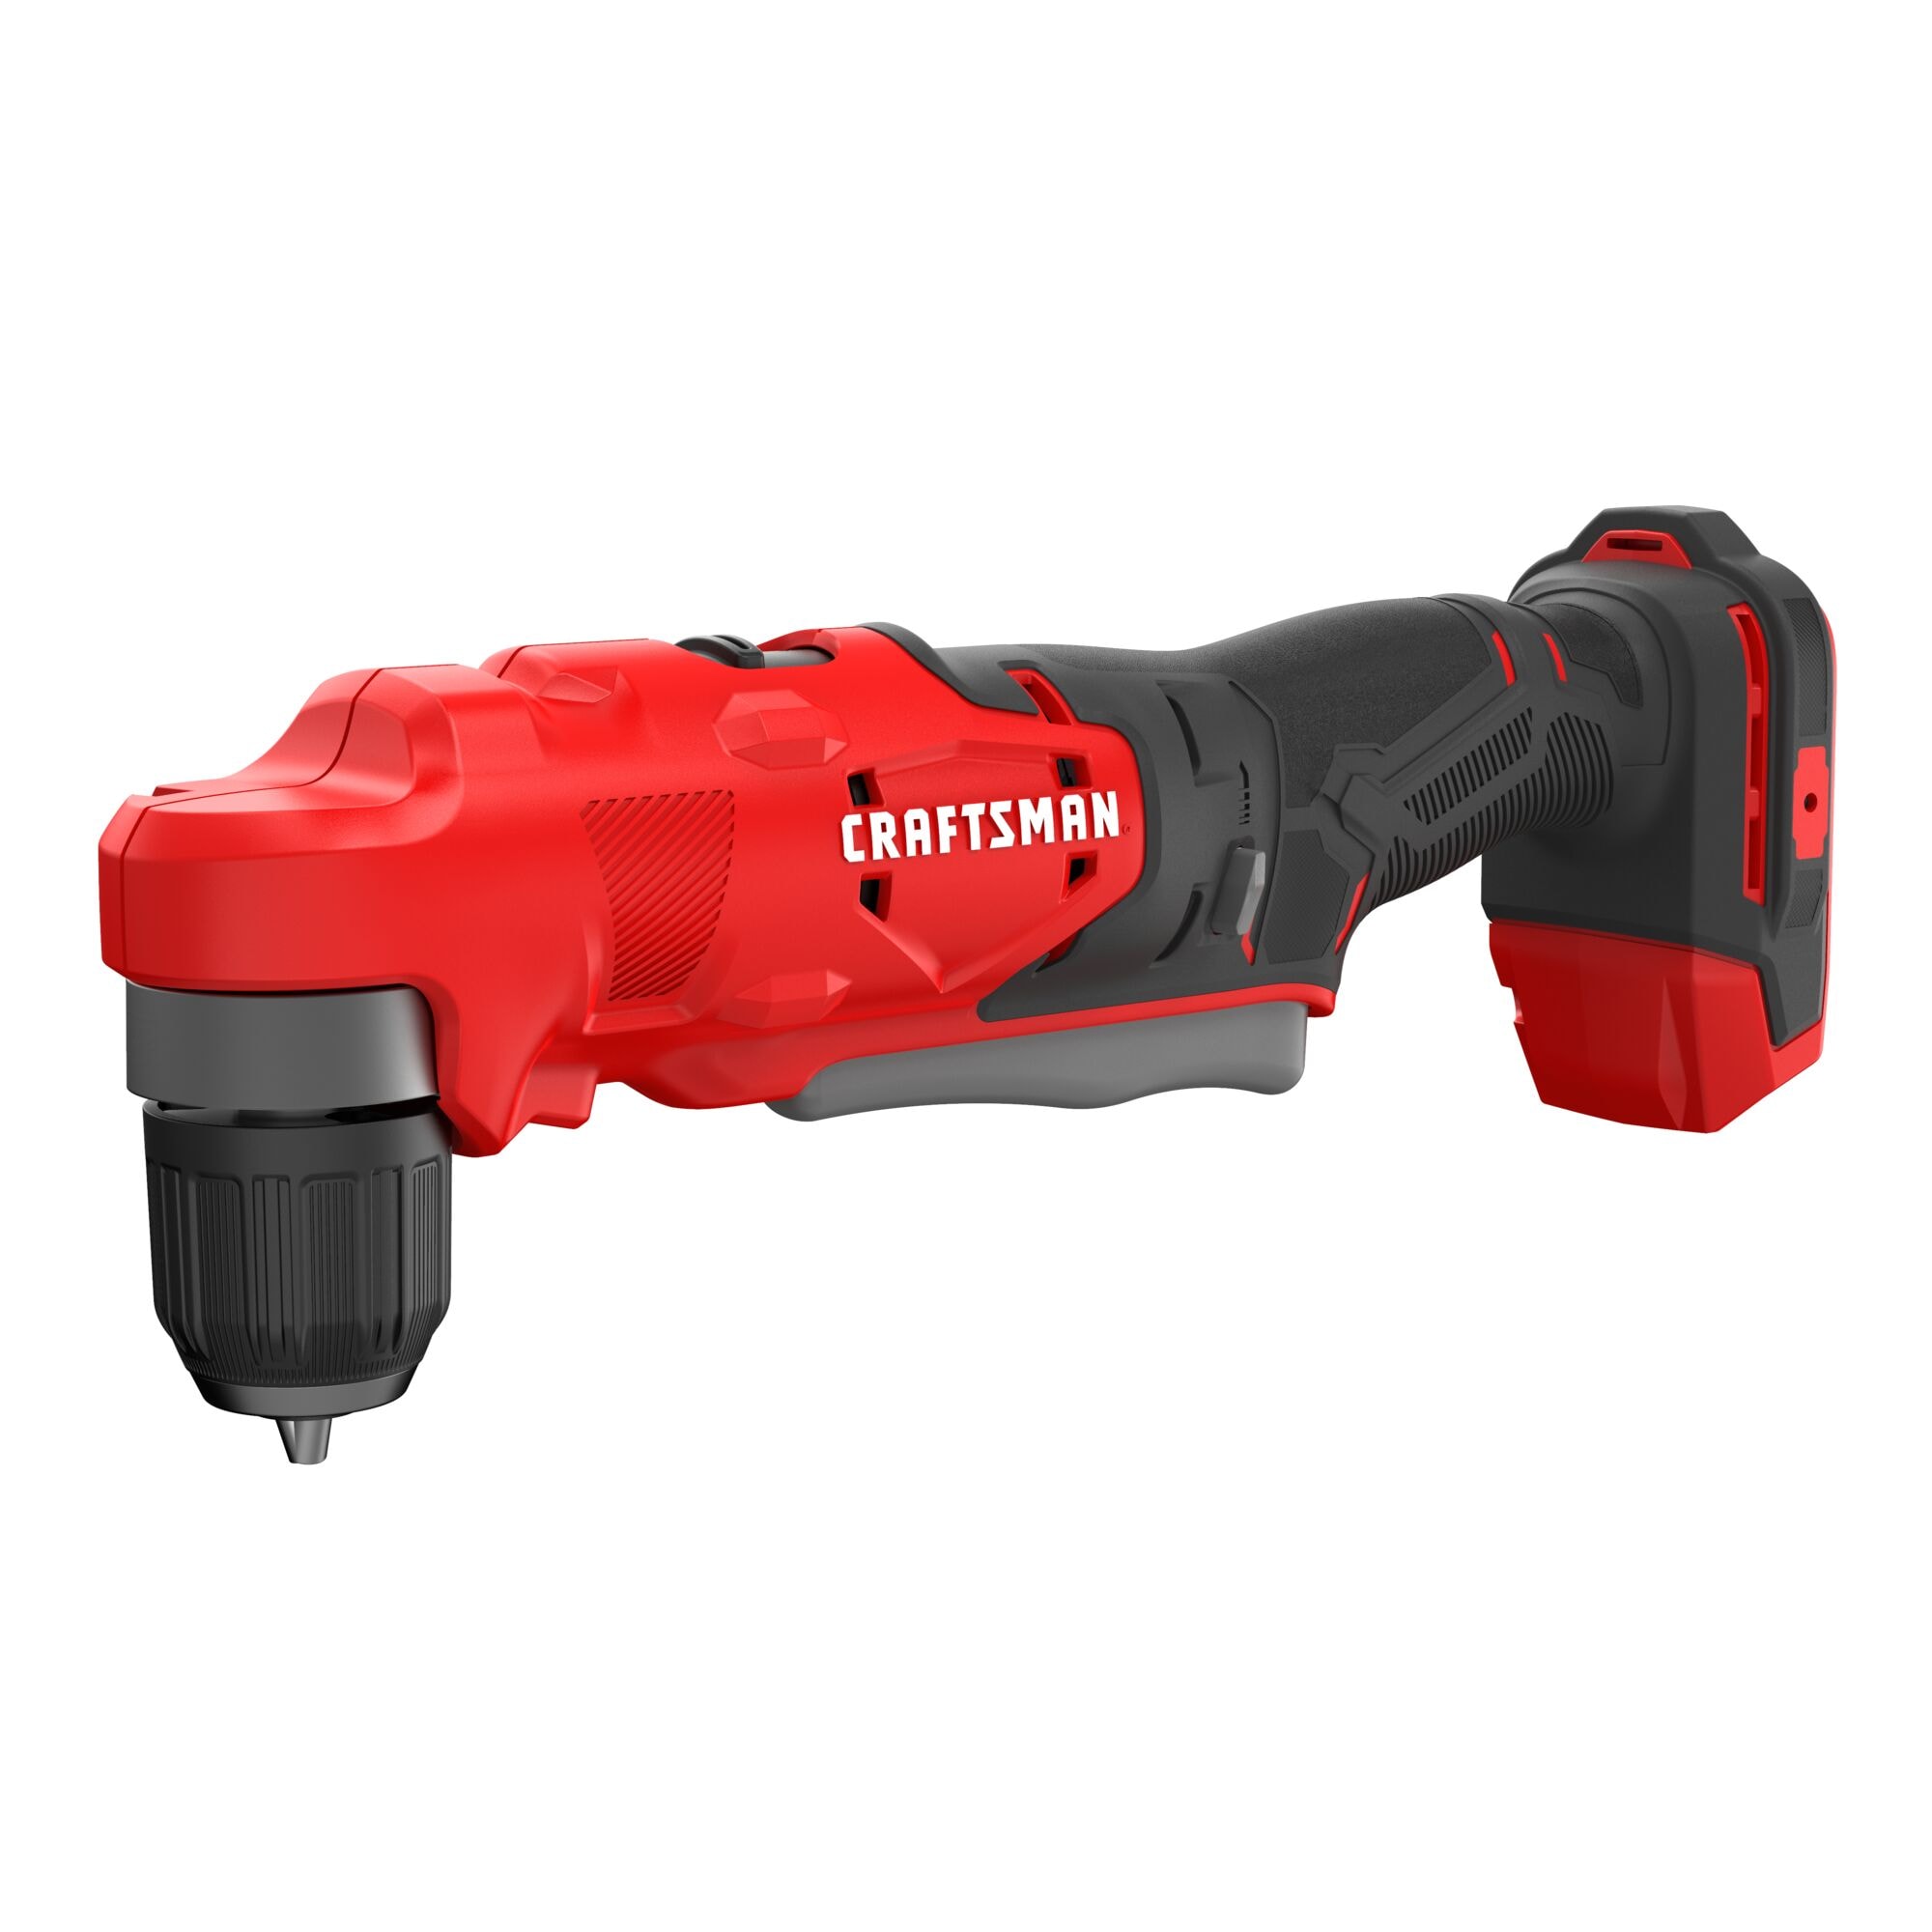 Many Craftsman Brushless Power Tools are on Clearance at Lowe's